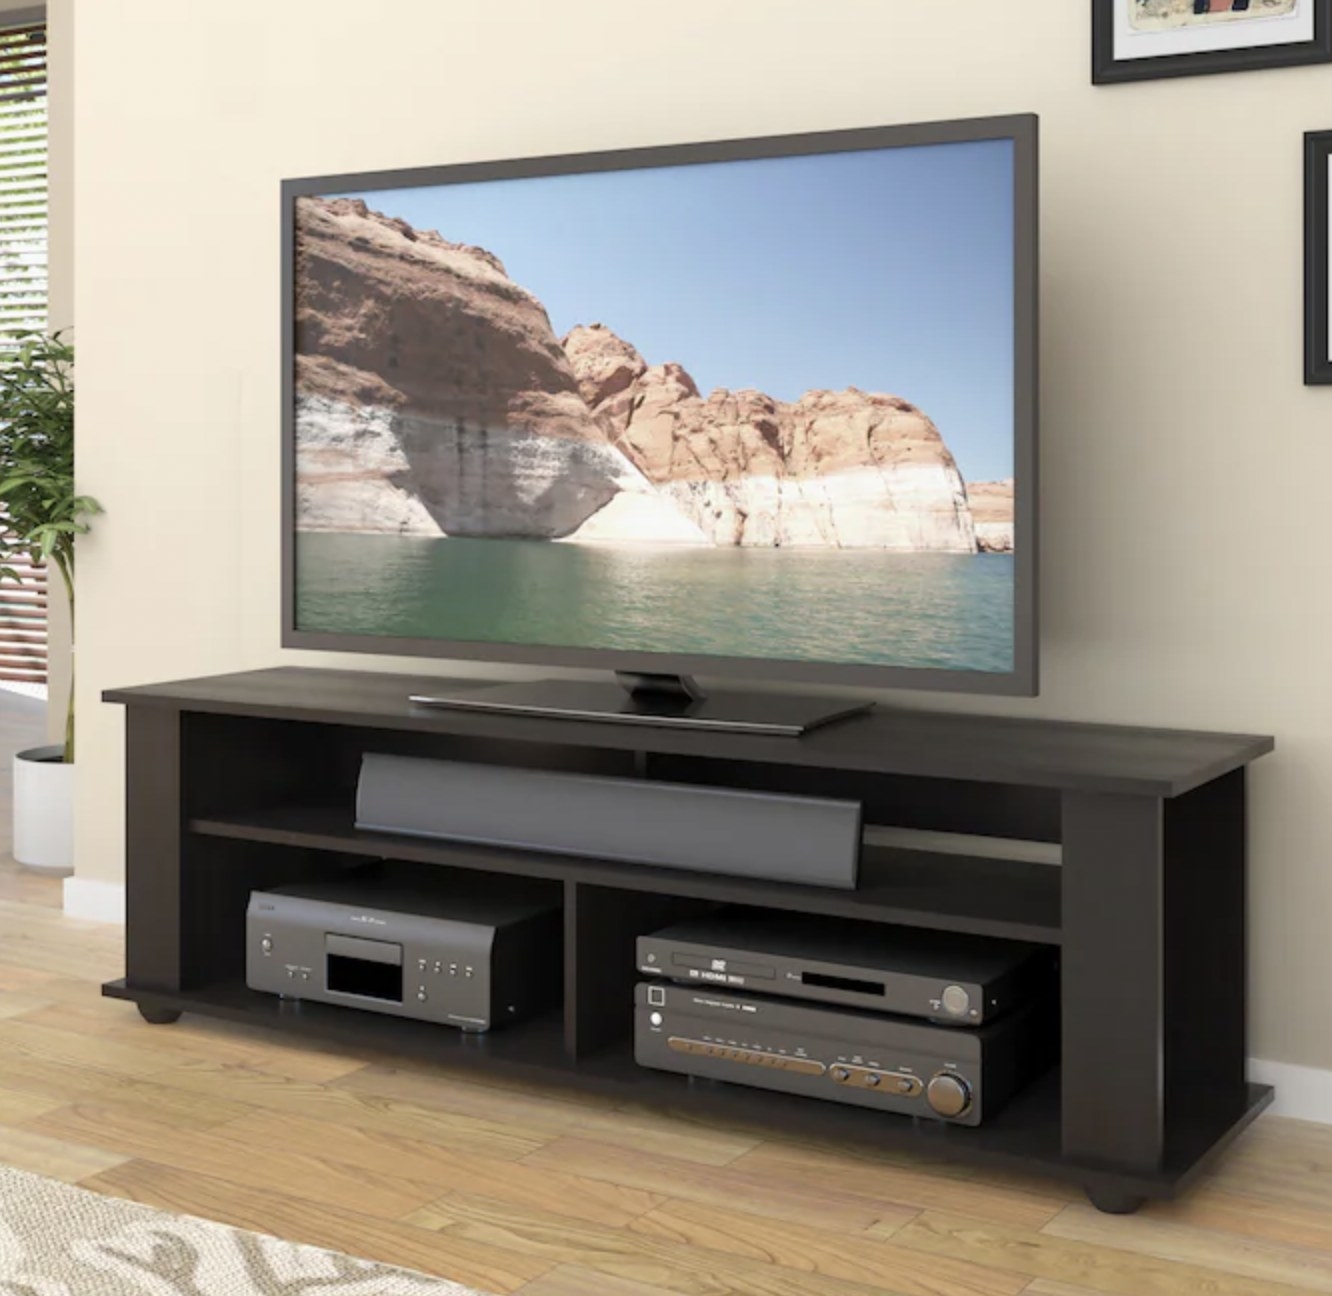 Black Ravenwood television stand with full length sound bar shelf propped against wall